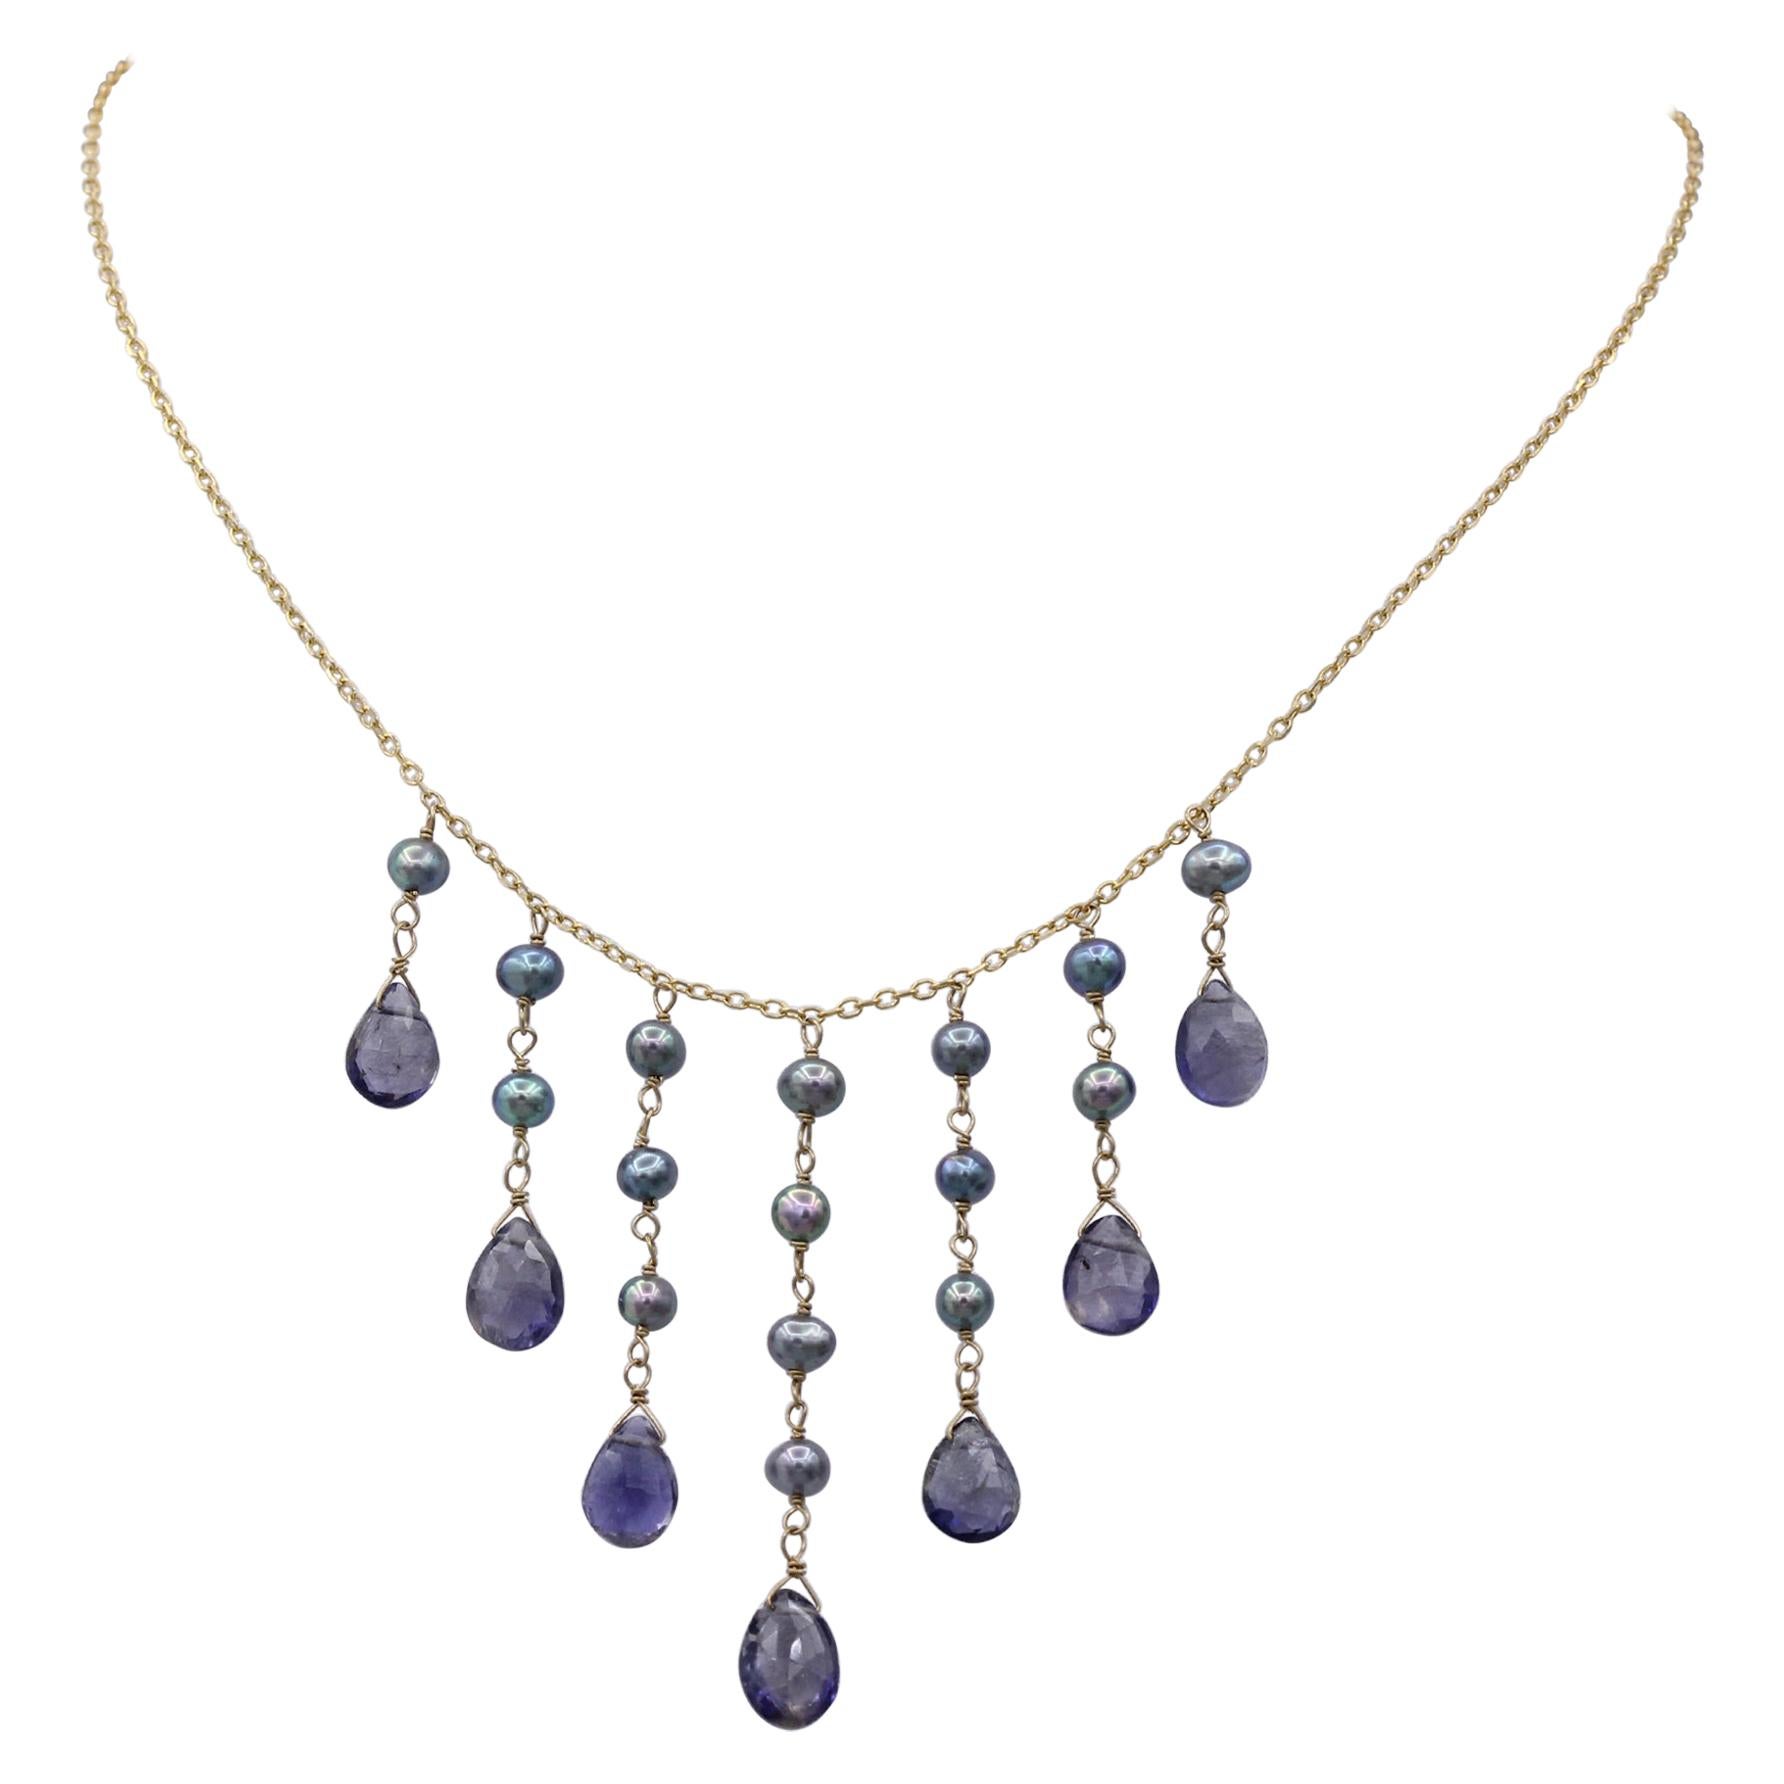 Dangling Necklace Blue Amethyst & Pearls Dangle Style 14 Karat Yellow Gold For Sale